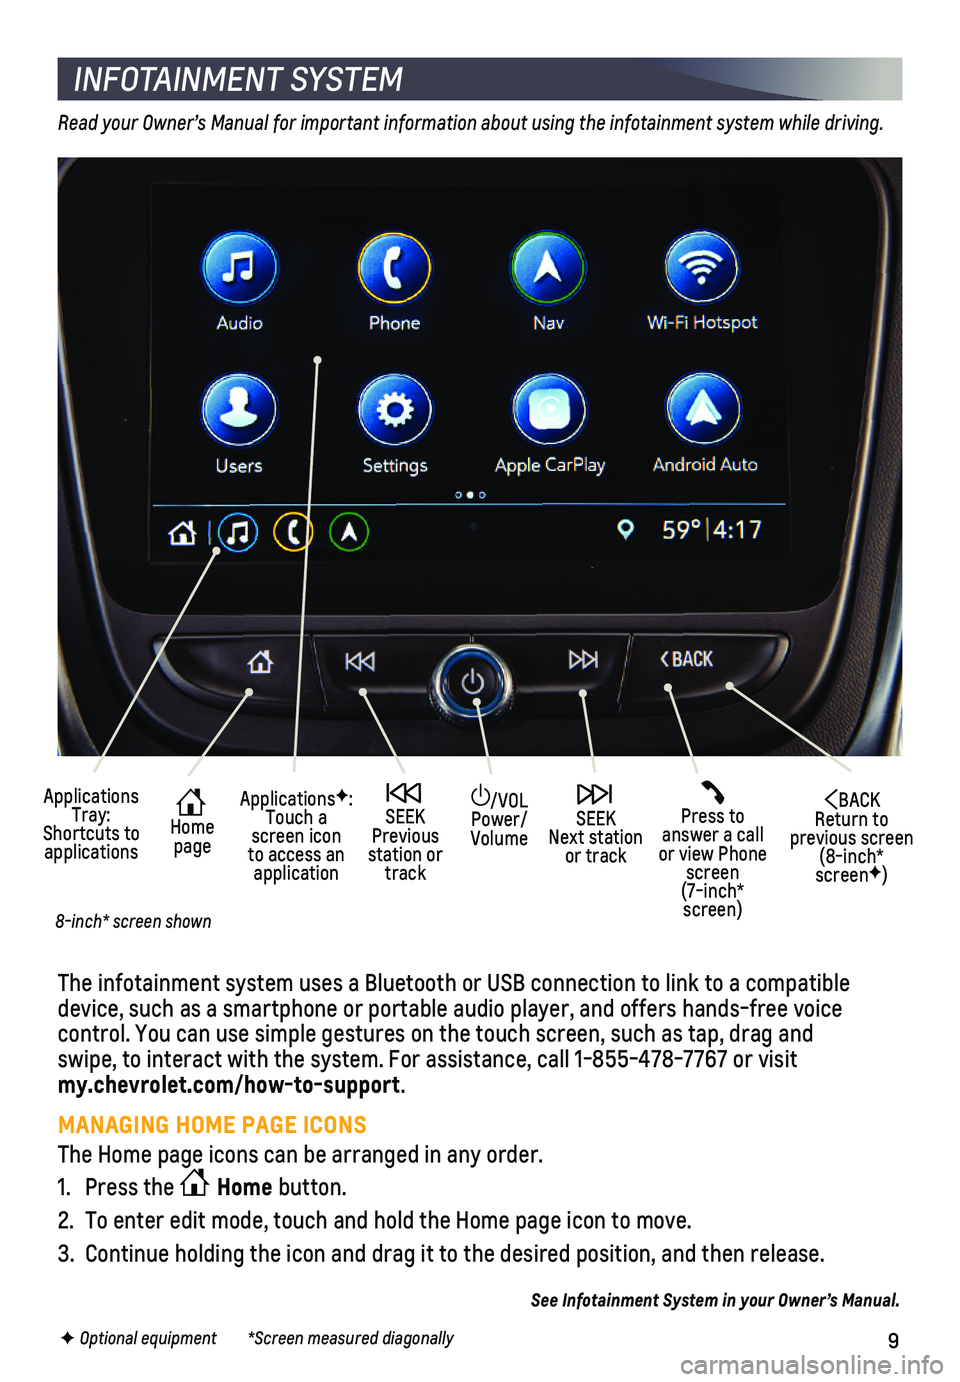 CHEVROLET EQUINOX 2021  Get To Know Guide 9F Optional equipment        *Screen measured diagonally
INFOTAINMENT SYSTEM
Read your Owner’s Manual for important information about using the infotainment system while driving.
The infotainment sy